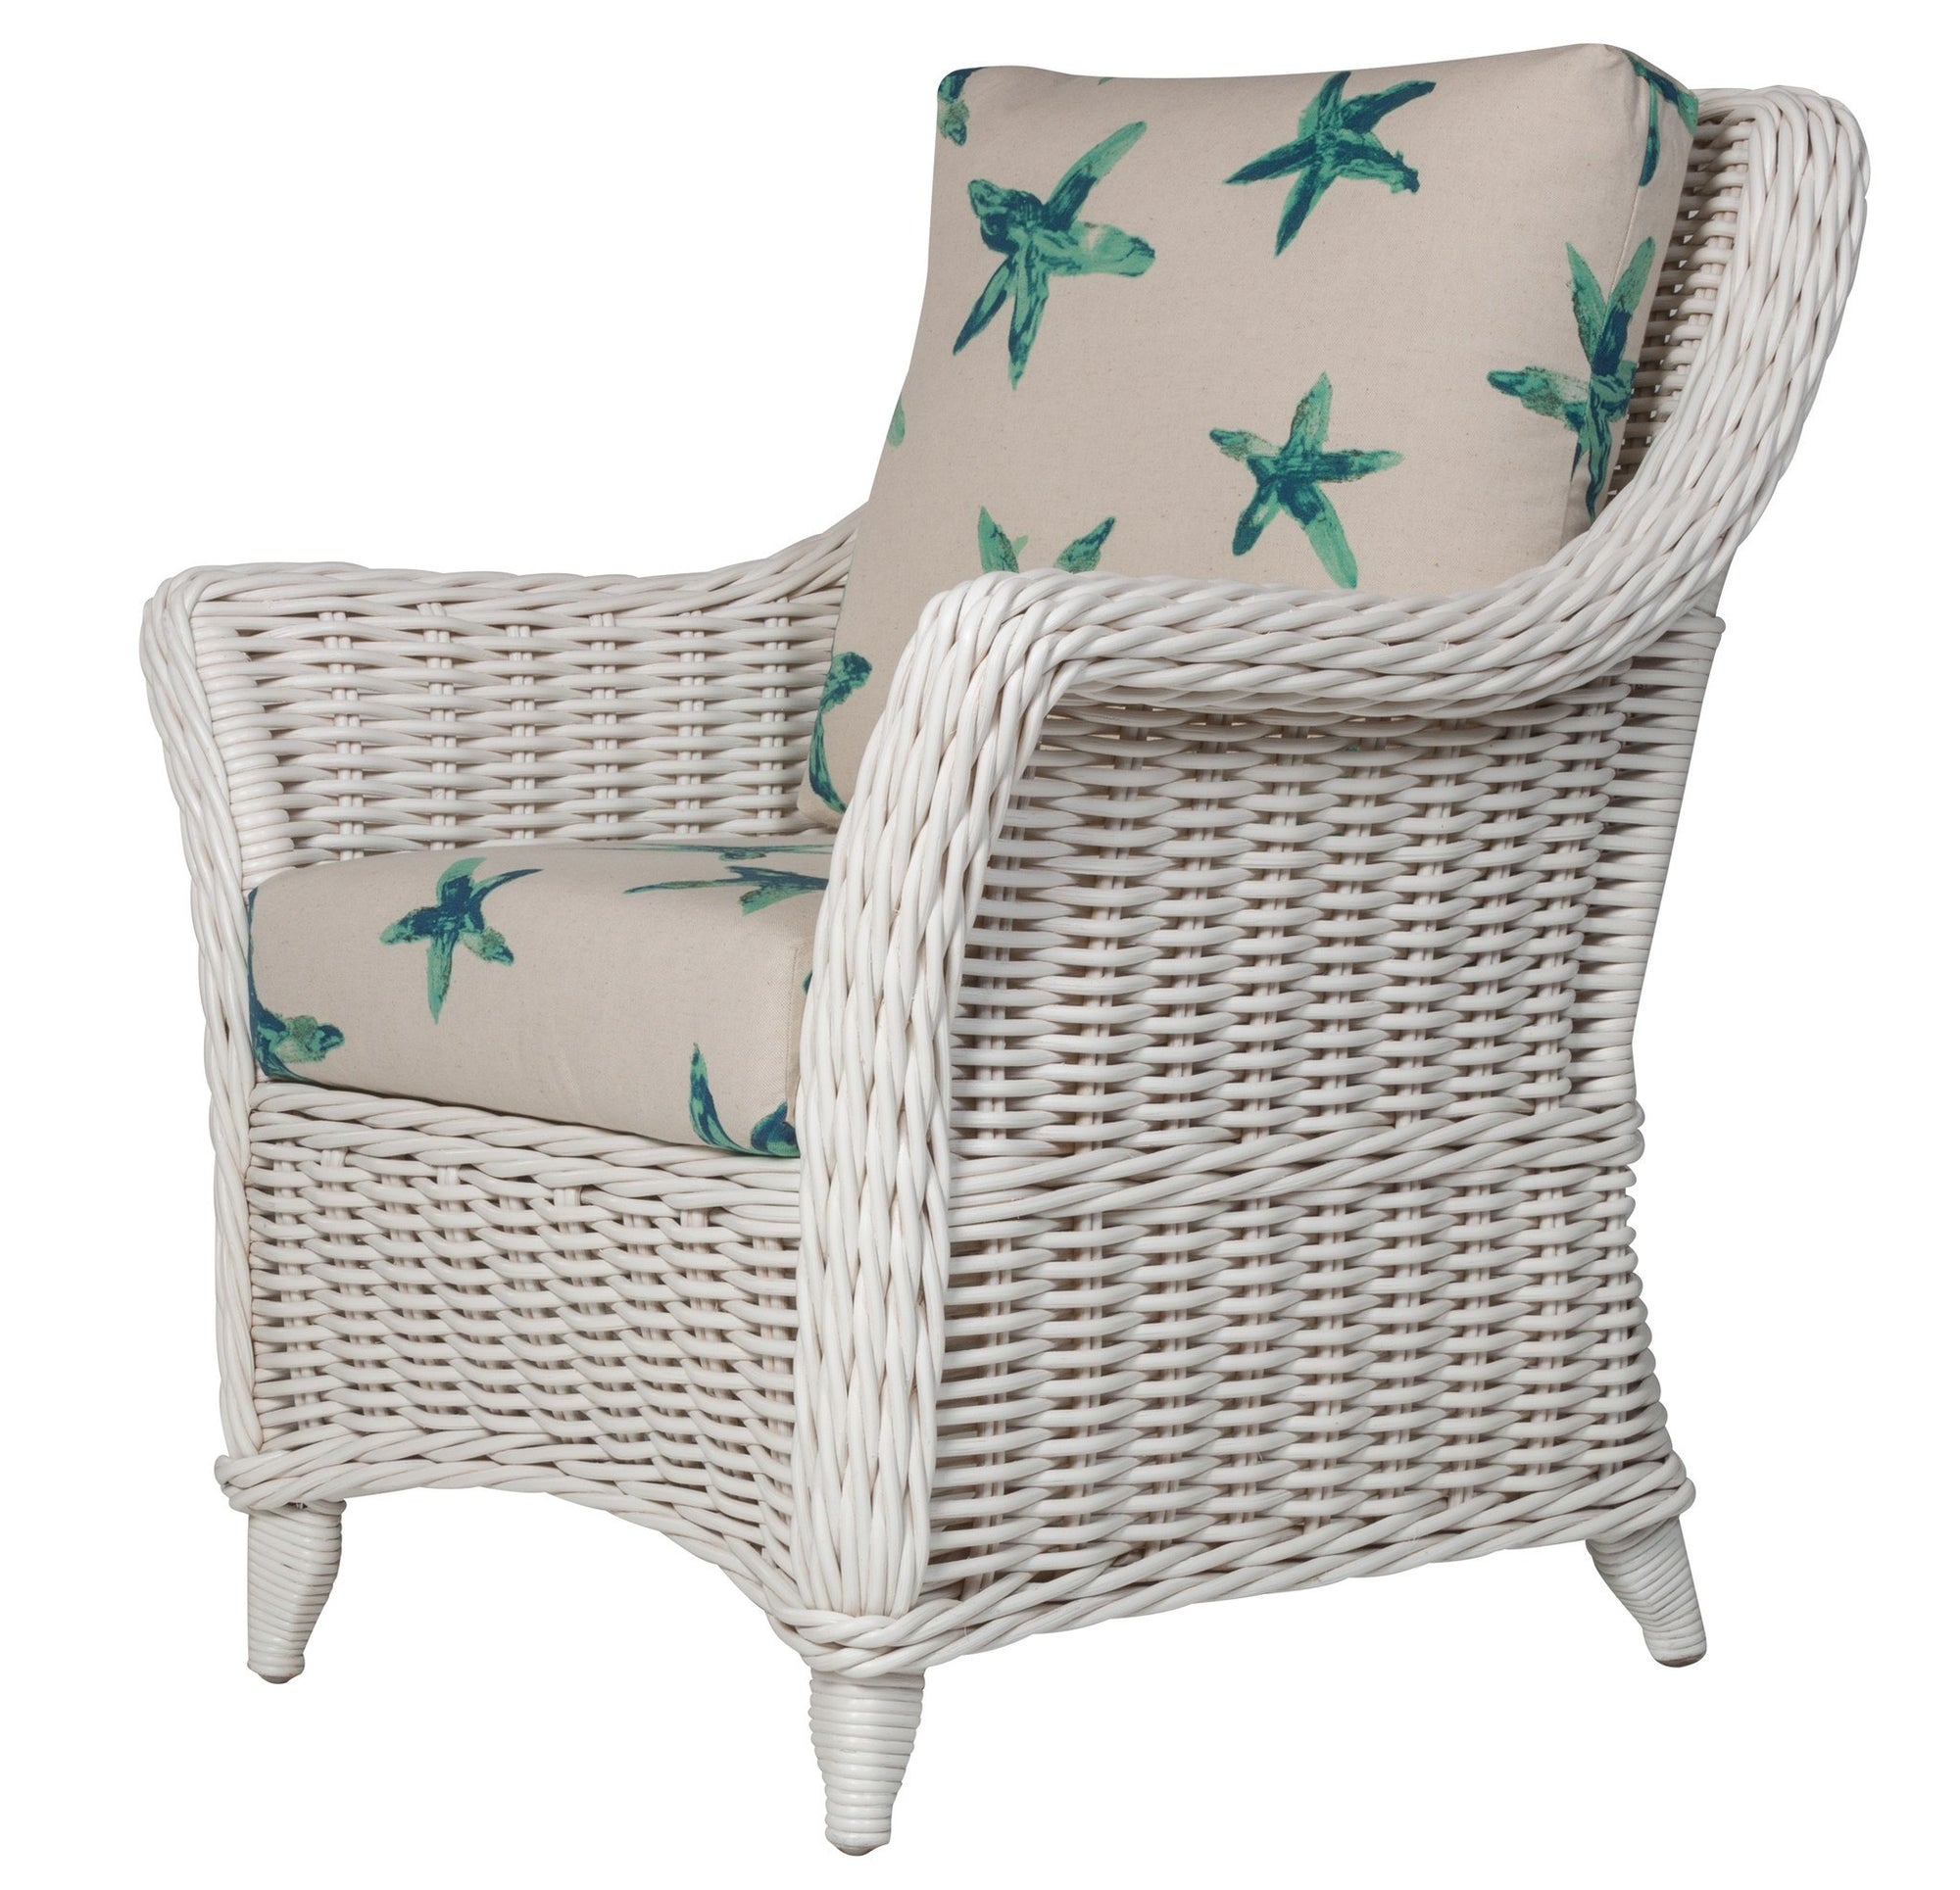 Designer Wicker & Rattan By Tribor Conservatory Arm Chair by Designer Wicker from Tribor Chair - Rattan Imports